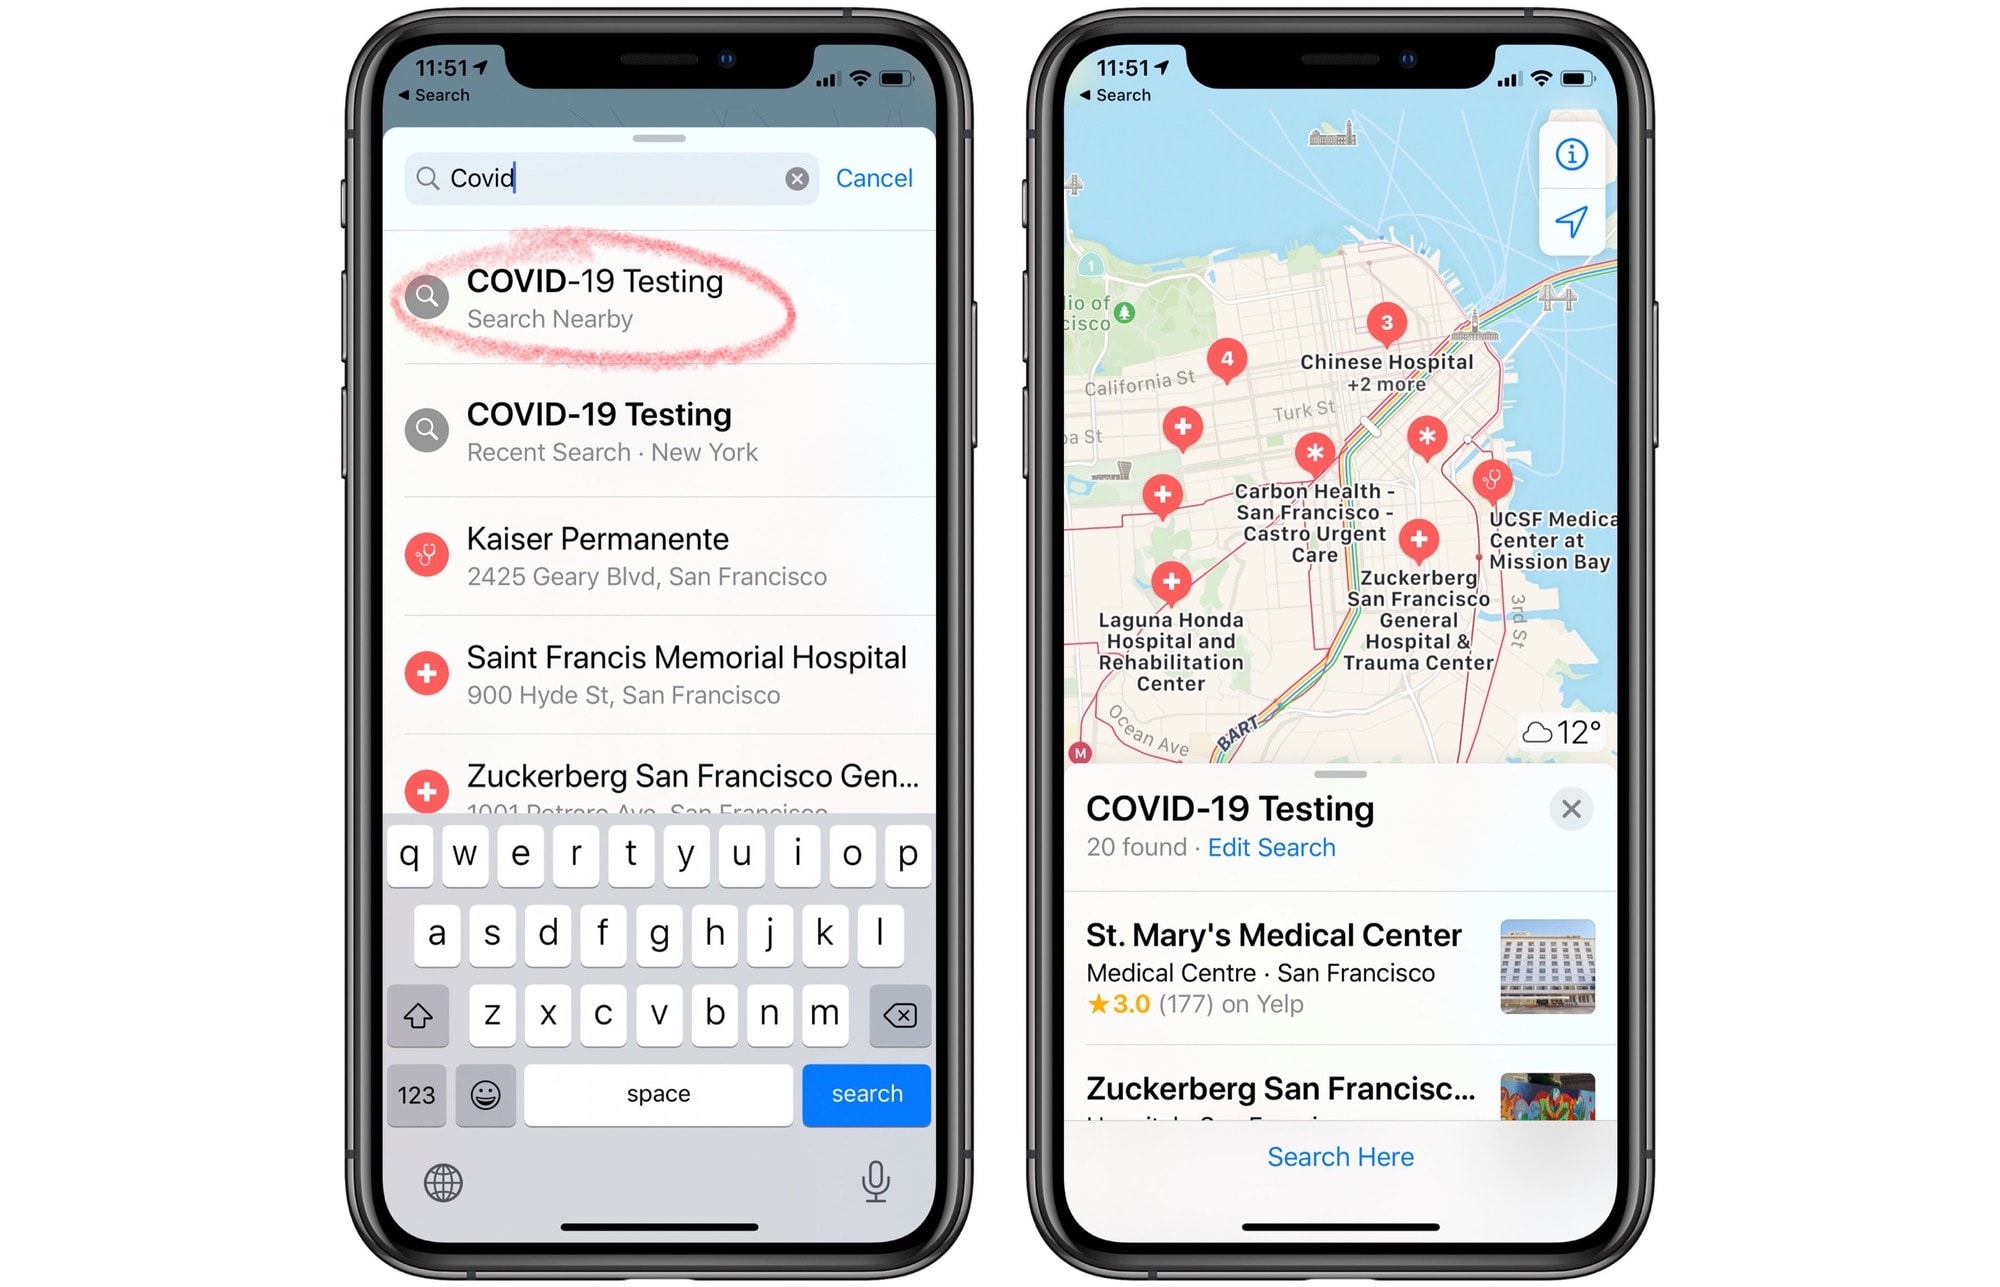 Search Apple Maps to show all COVID-19 testing stations near you.